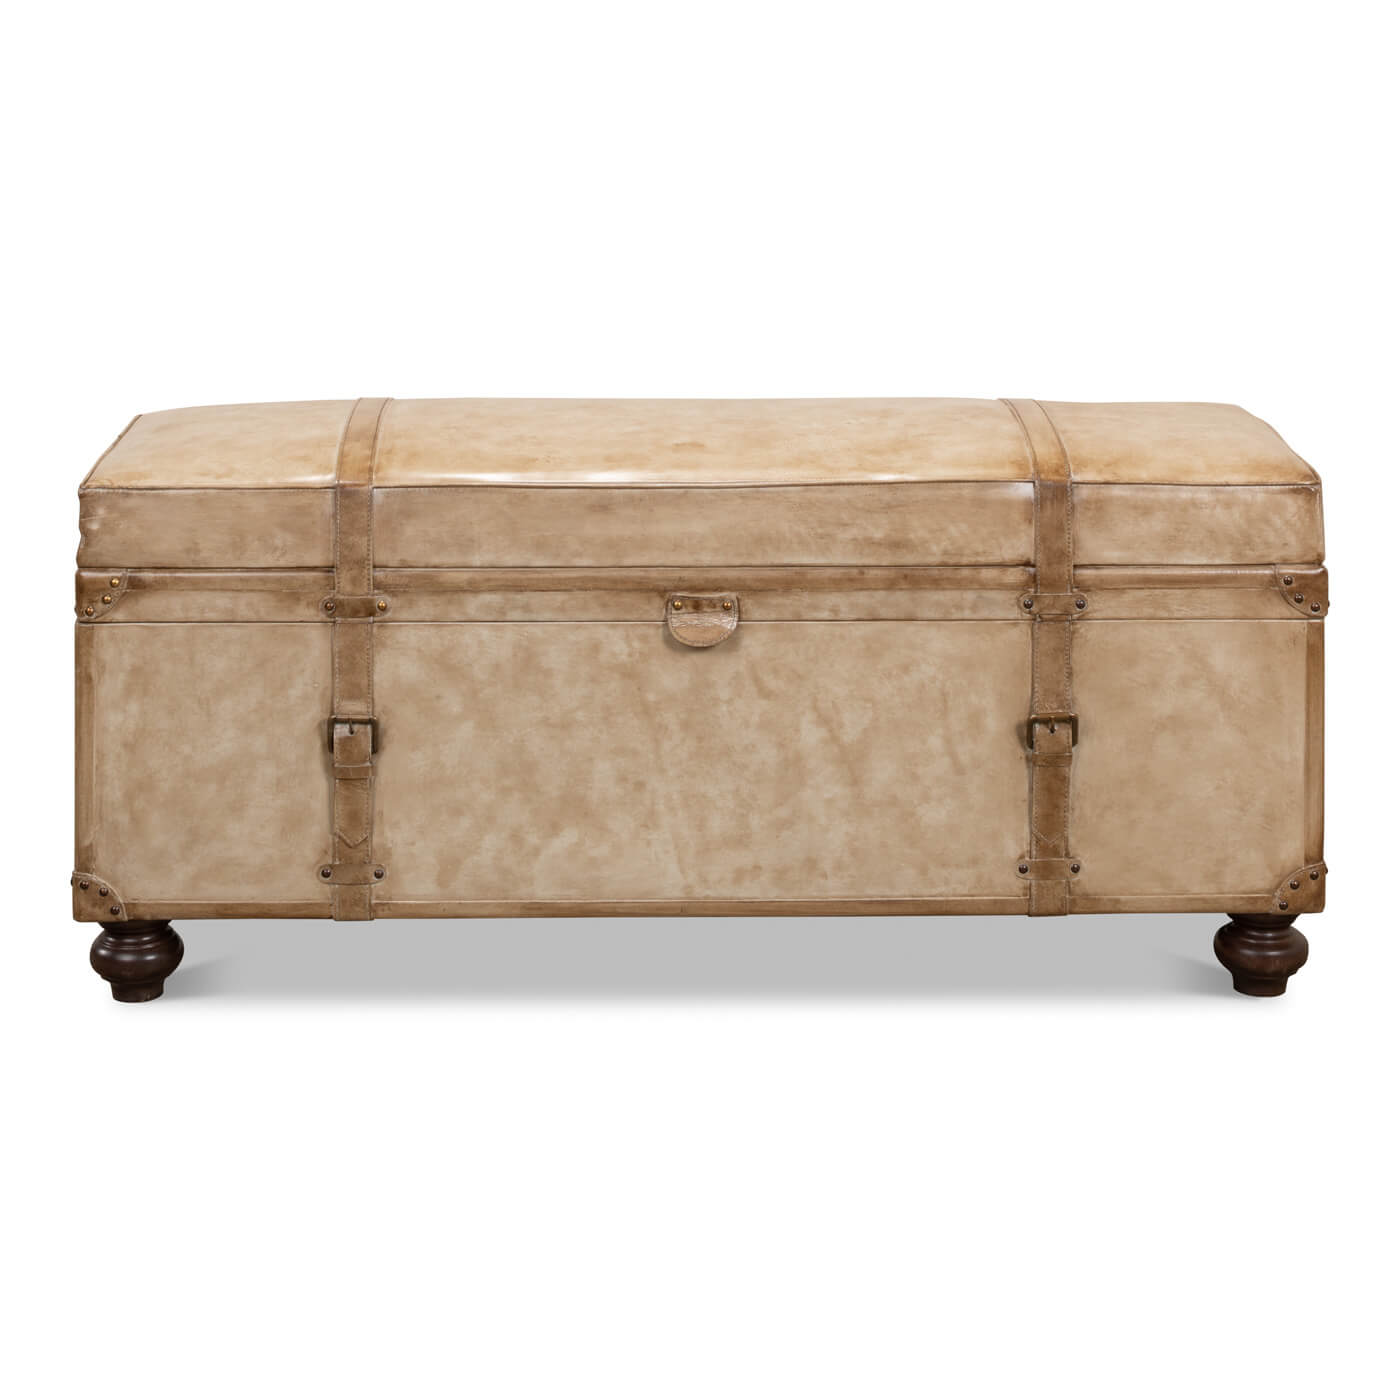 Vintage-Style Pearl Leather Trunk Bench - English Georgian America